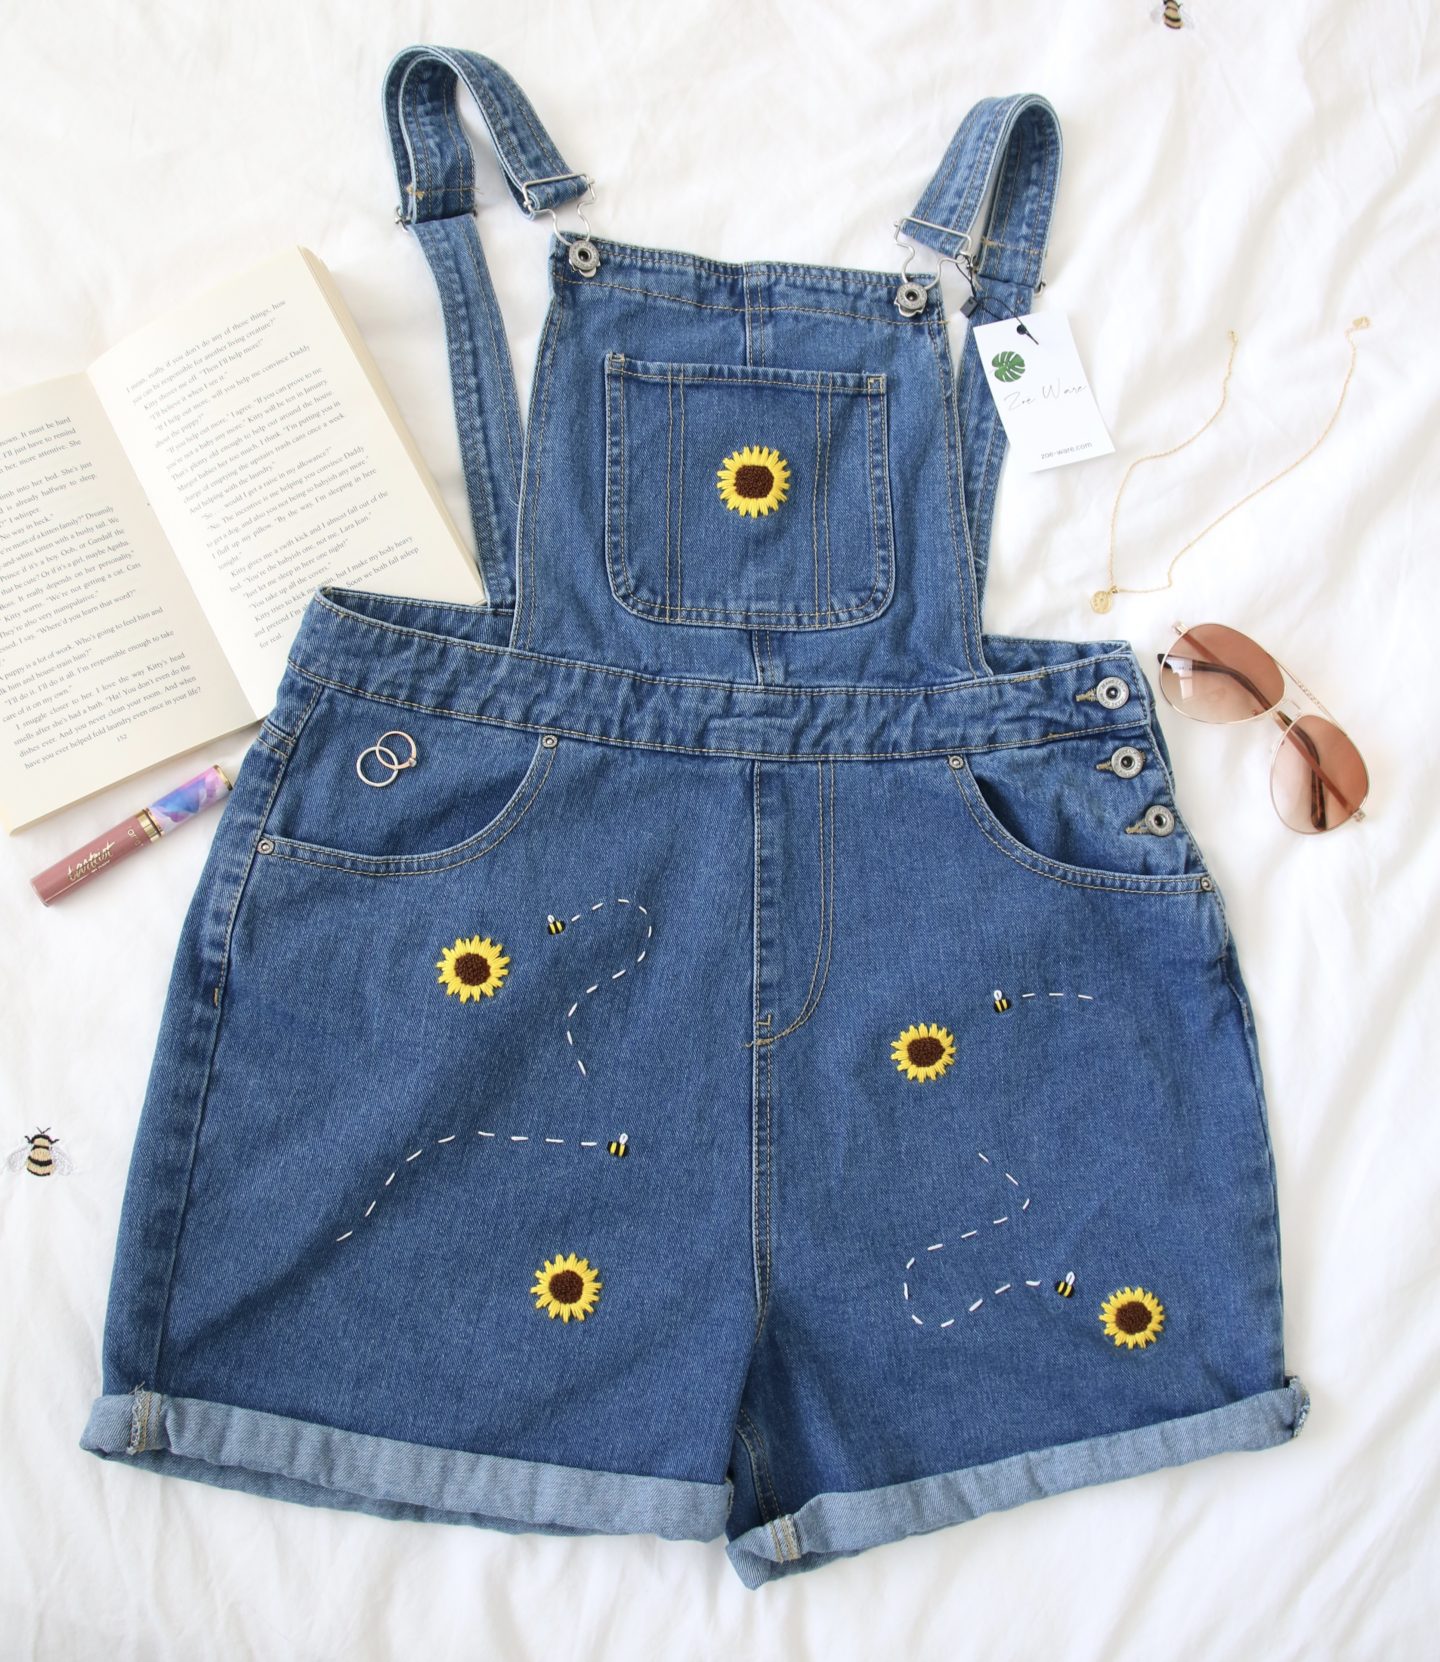 Flatlay of the Winnie overalls embroidered with sunflowers and bees